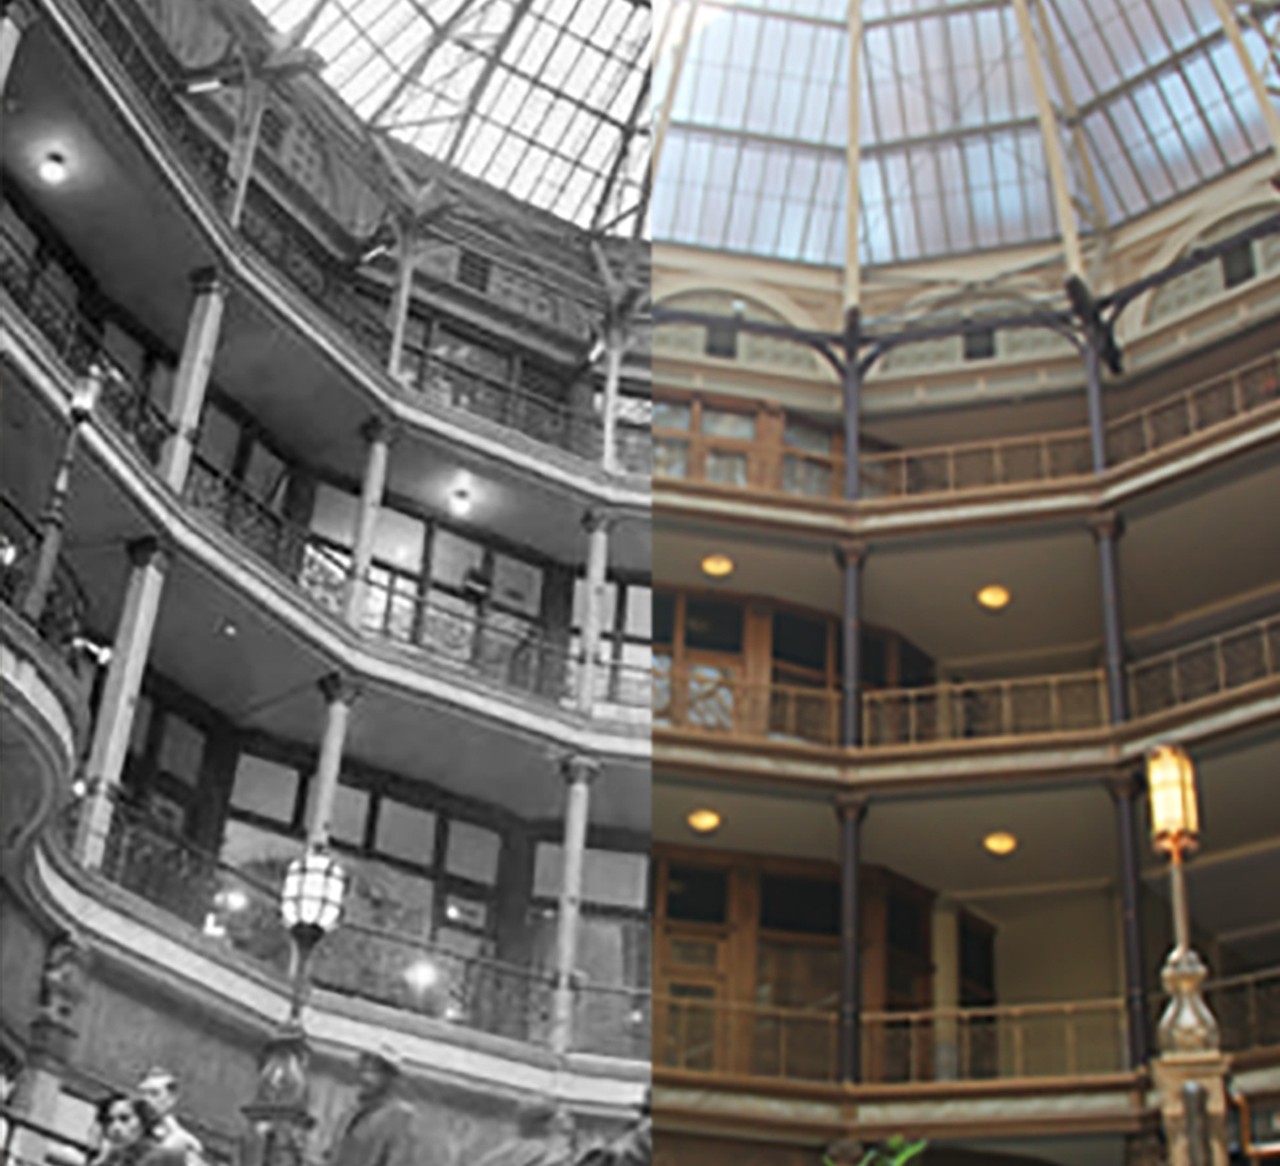 The Arcade adopted the nickname the "Crystal Palace" soon after opening because of its large skylights. Also thanks to its massive natural lighting, there isn't much of a need for bulbs or lamps.